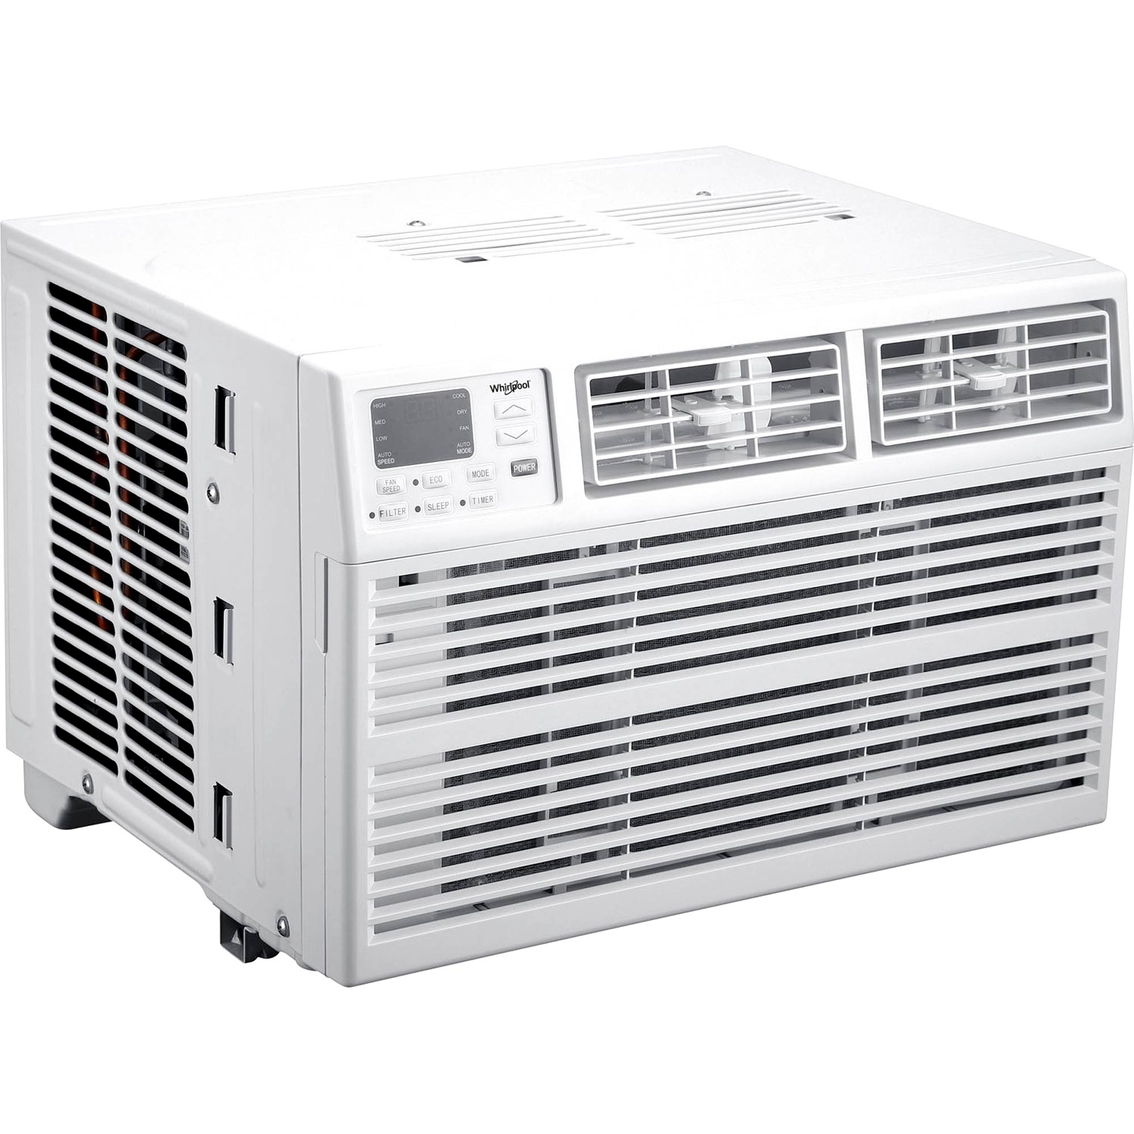 Whirlpool Energy Star 8,000 BTU Window Mounted Air Conditioner with Remote Control - Image 2 of 5